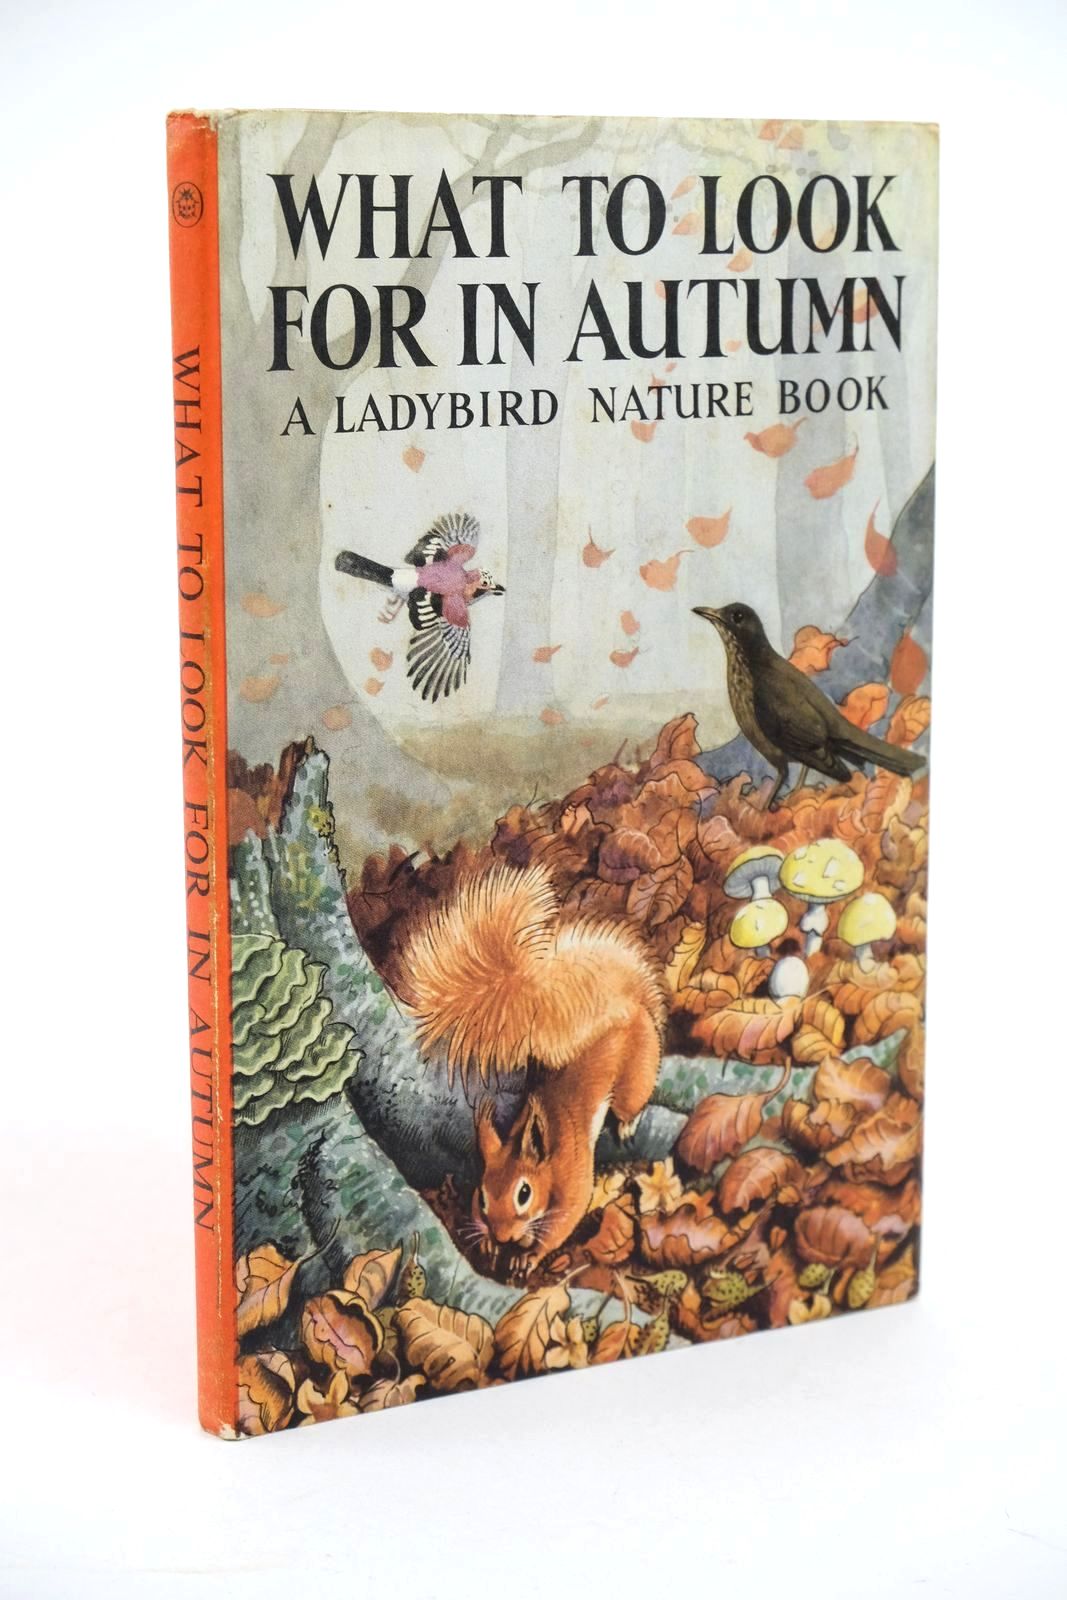 Photo of WHAT TO LOOK FOR IN AUTUMN written by Watson, E.L. Grant illustrated by Tunnicliffe, C.F. published by Wills & Hepworth Ltd. (STOCK CODE: 1323144)  for sale by Stella & Rose's Books